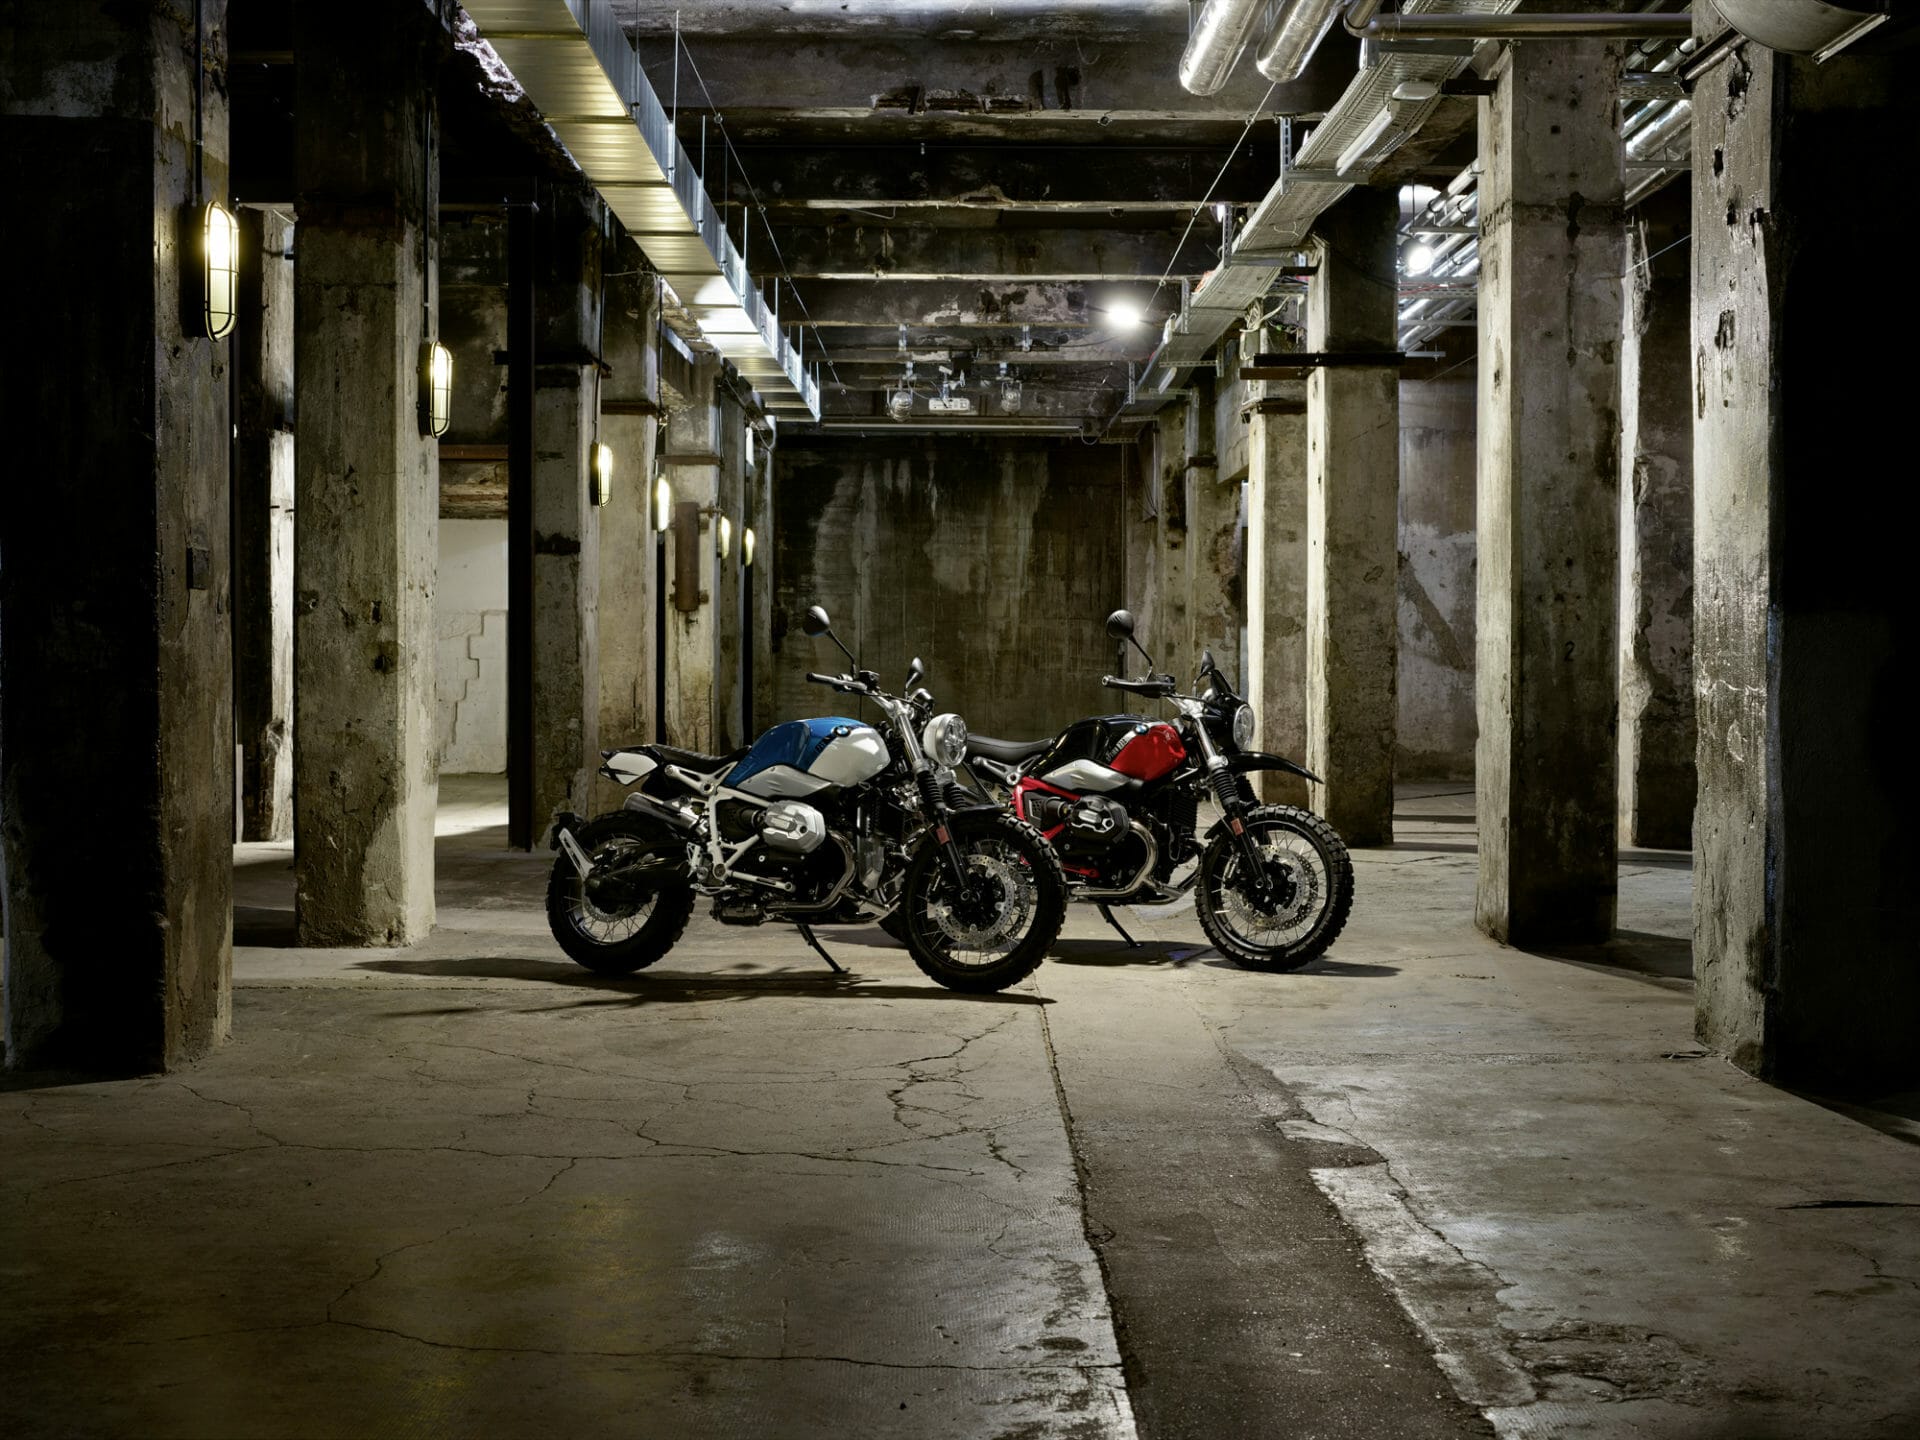 BMW presents new R nineT models
- also in the App MOTORCYCLE NEWS